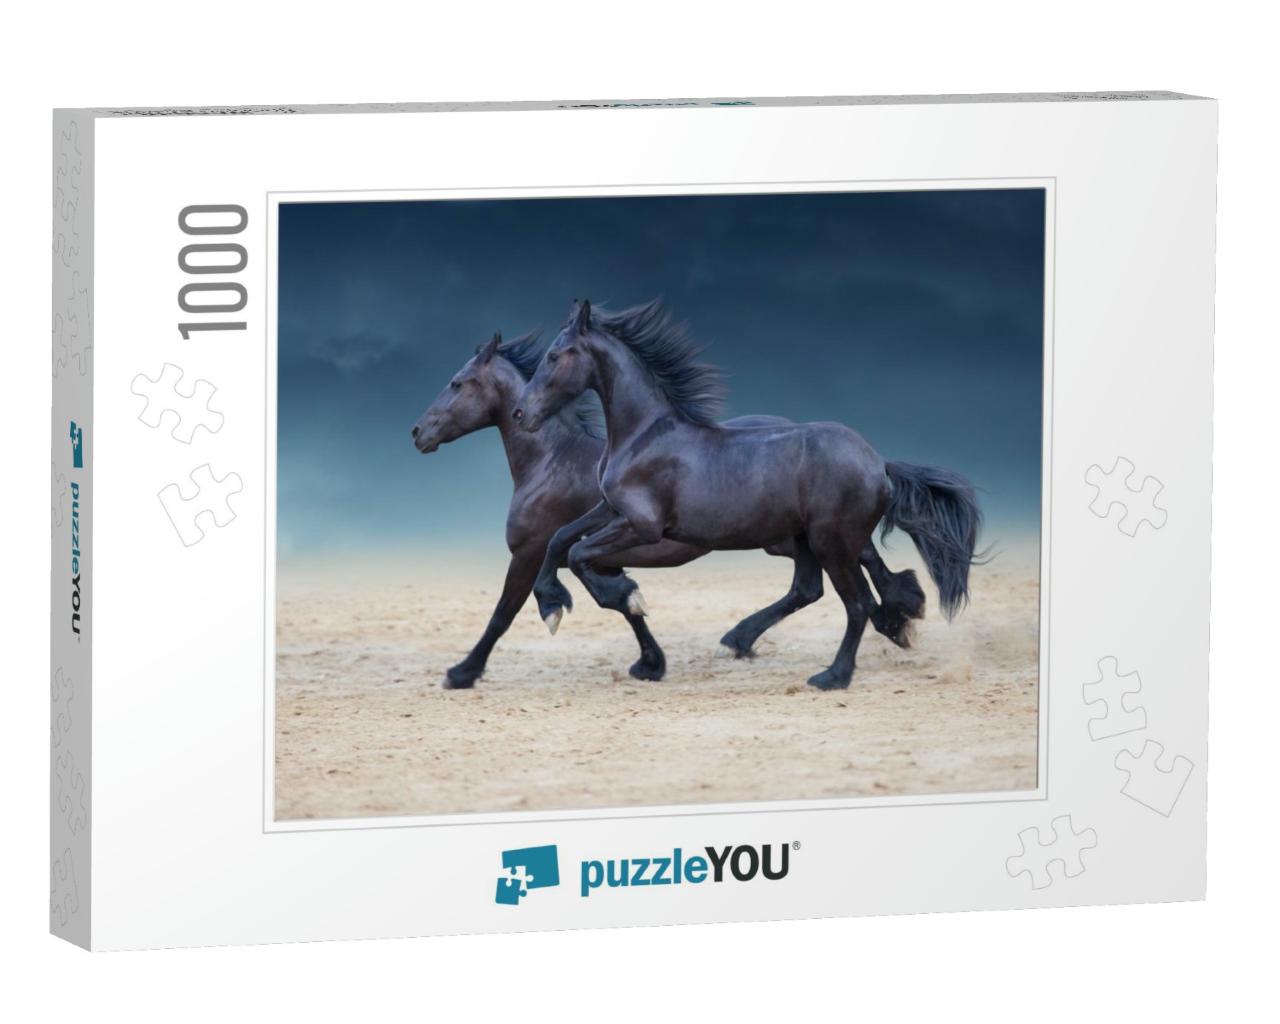 Two Frisian Horses Run Gallop on Desert Dust Against Sky... Jigsaw Puzzle with 1000 pieces